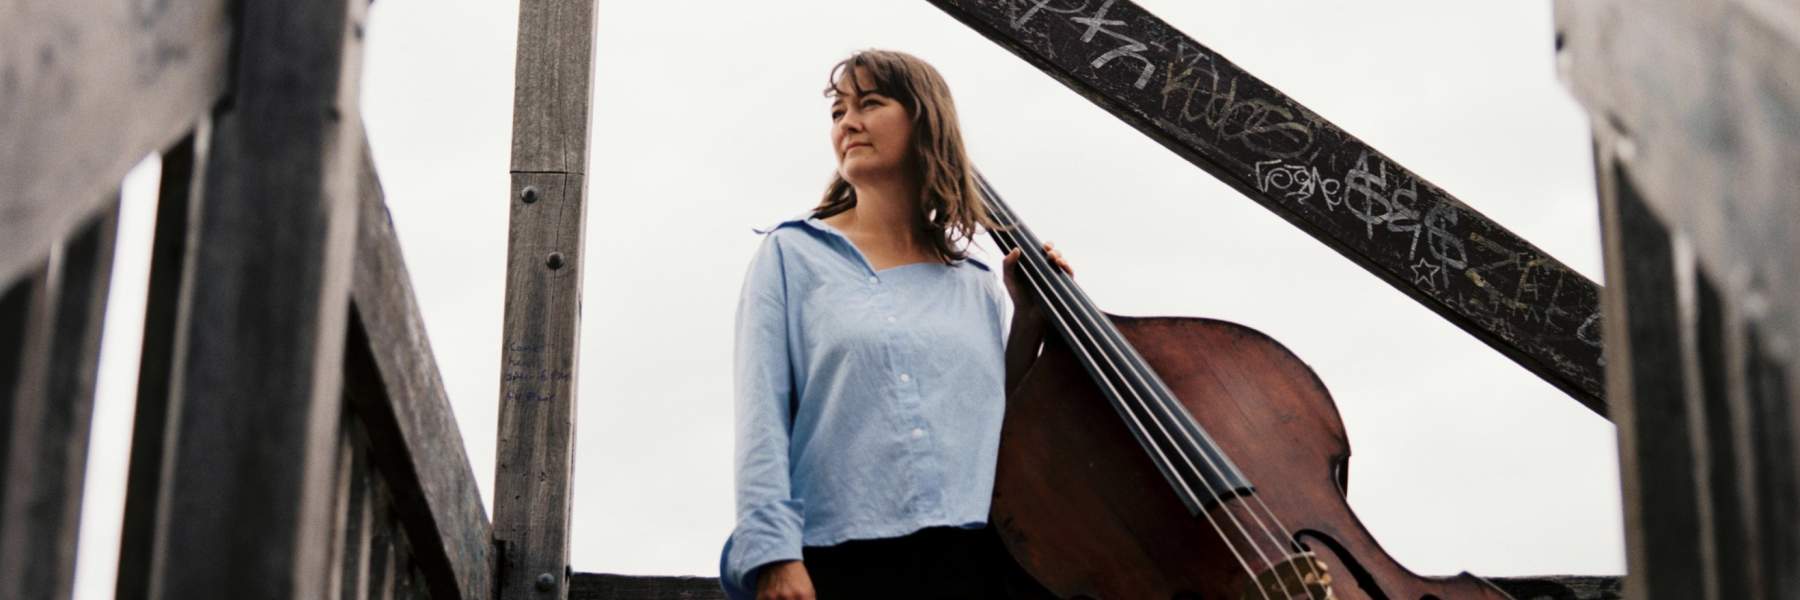 Tamara Murphy standing at the top of a staircase outside with a double bass.